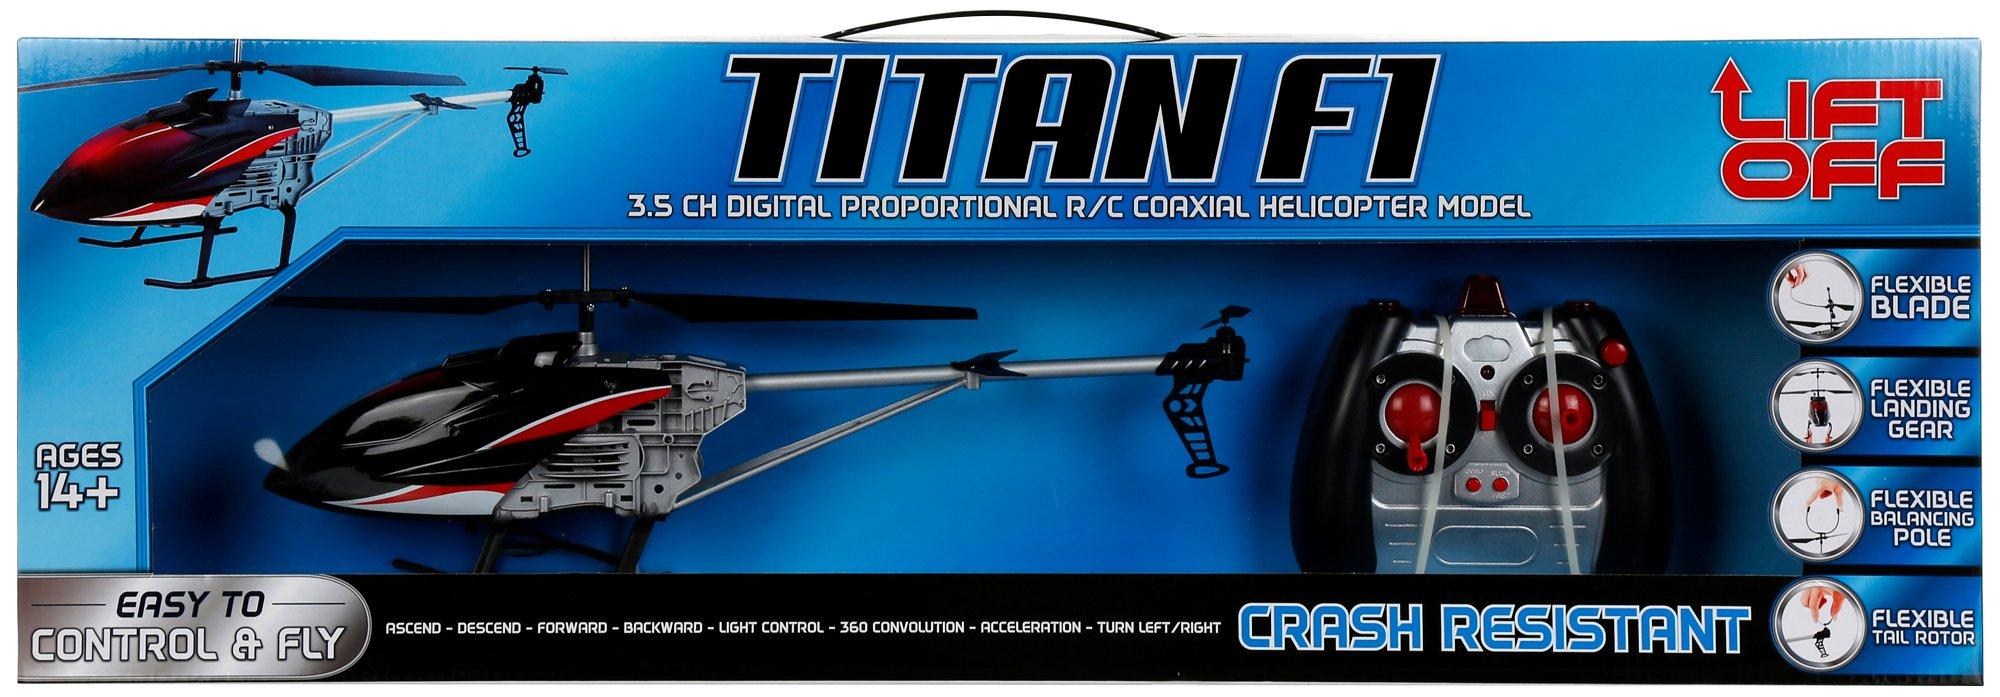 titan f1 rc helicopter